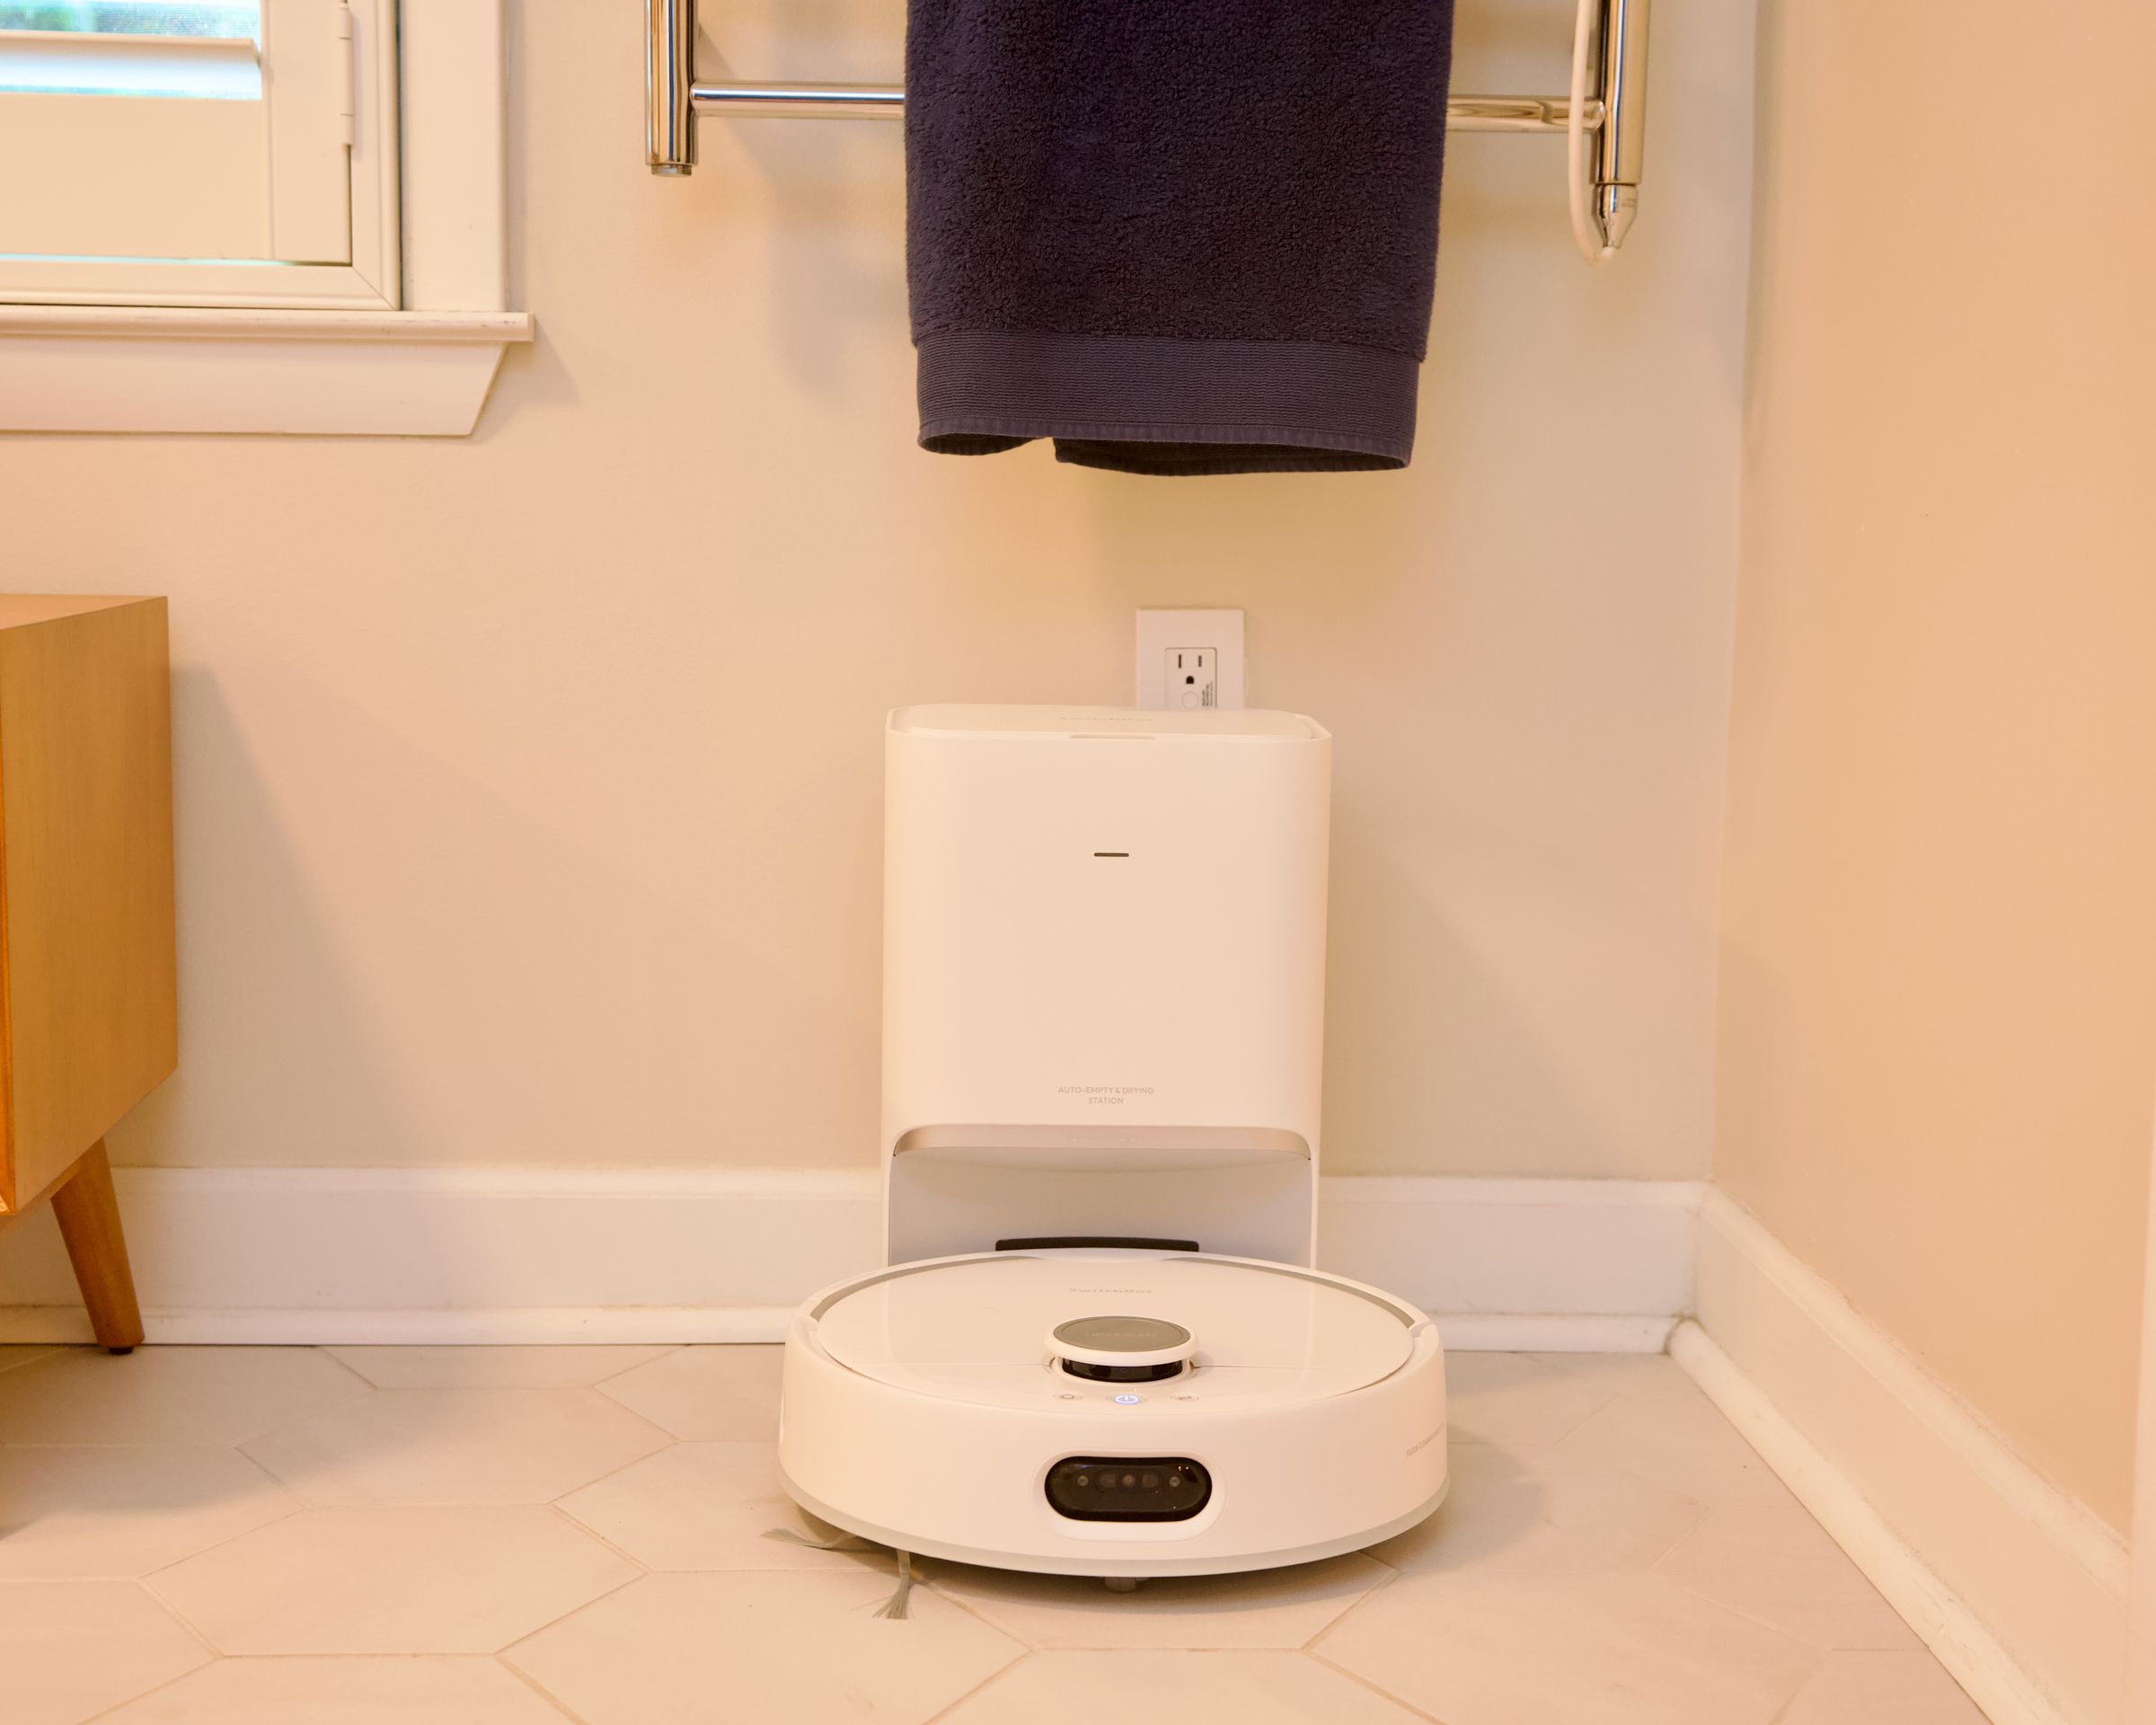 The SwitchBot S10 has two docks, a regular charging station that auto-empties, and a separate water station that can hook into your plumbing.